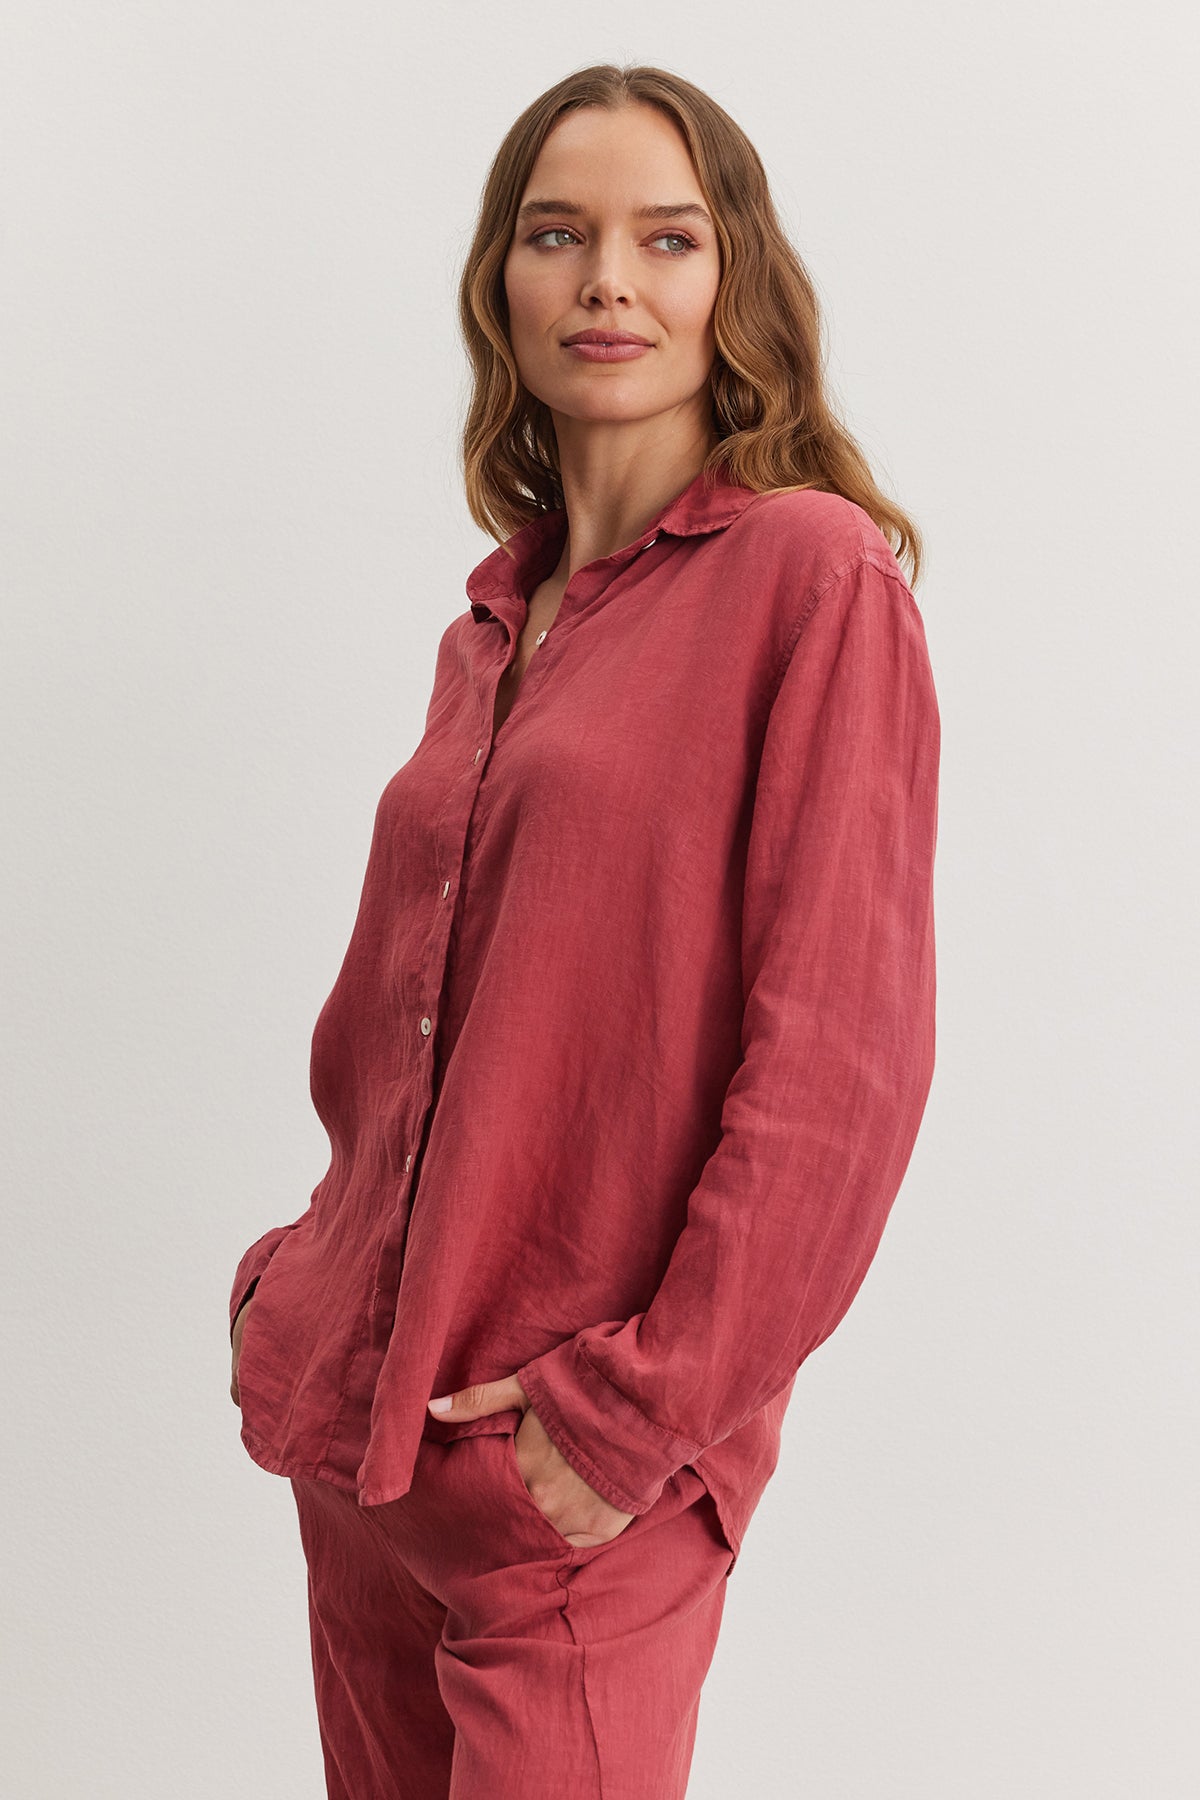 Woman in a relaxed fit red Velvet by Graham & Spencer Willow Linen Button-Up Shirt and pants, standing with one hand in pocket, looking at the camera with a slight smile.-36909598310593